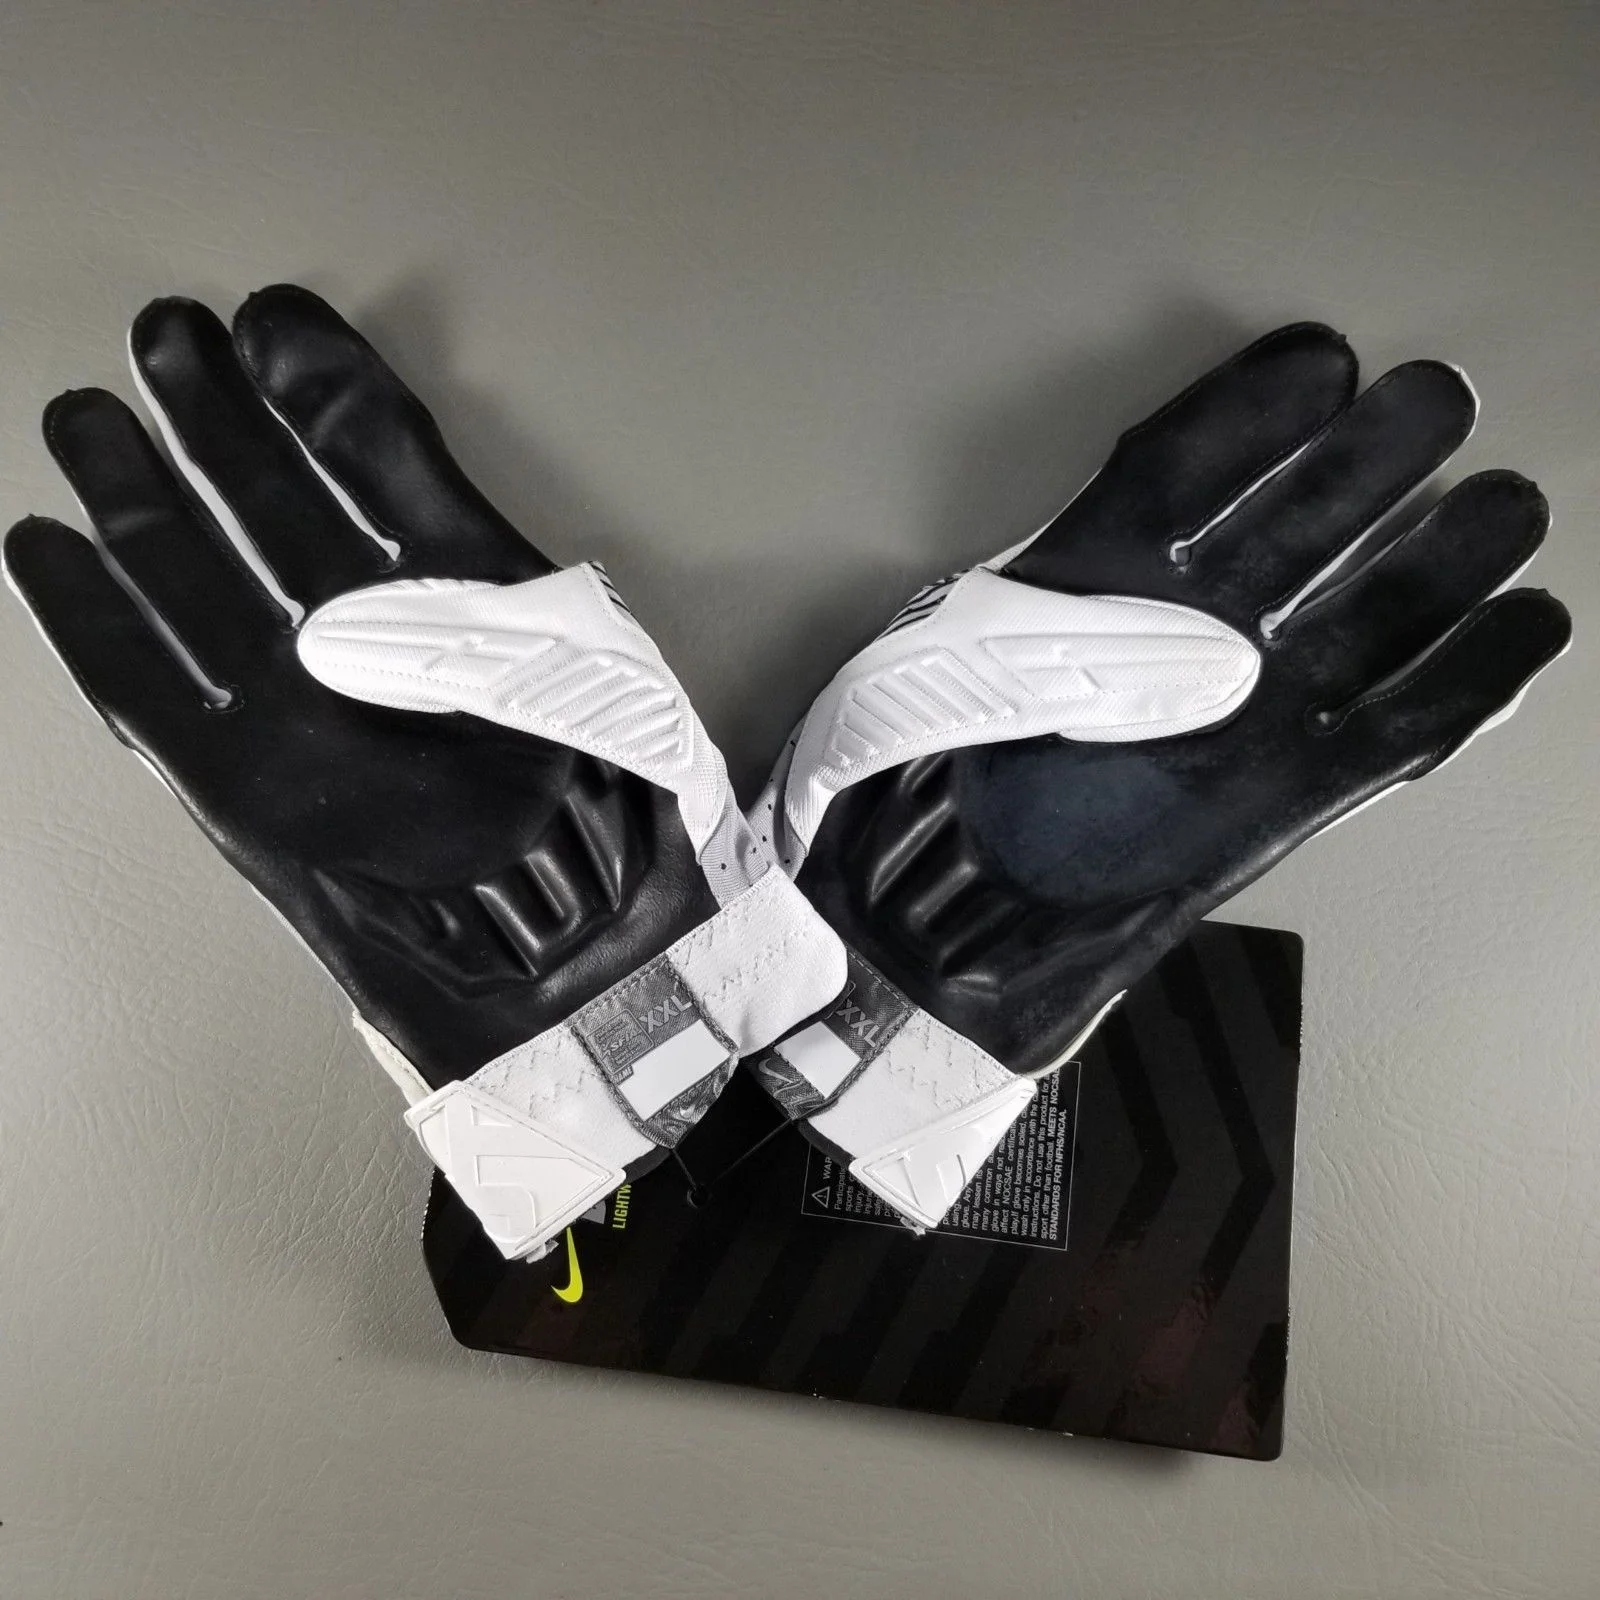 
Cheapest New Arrival American Football Glove / Gloves 